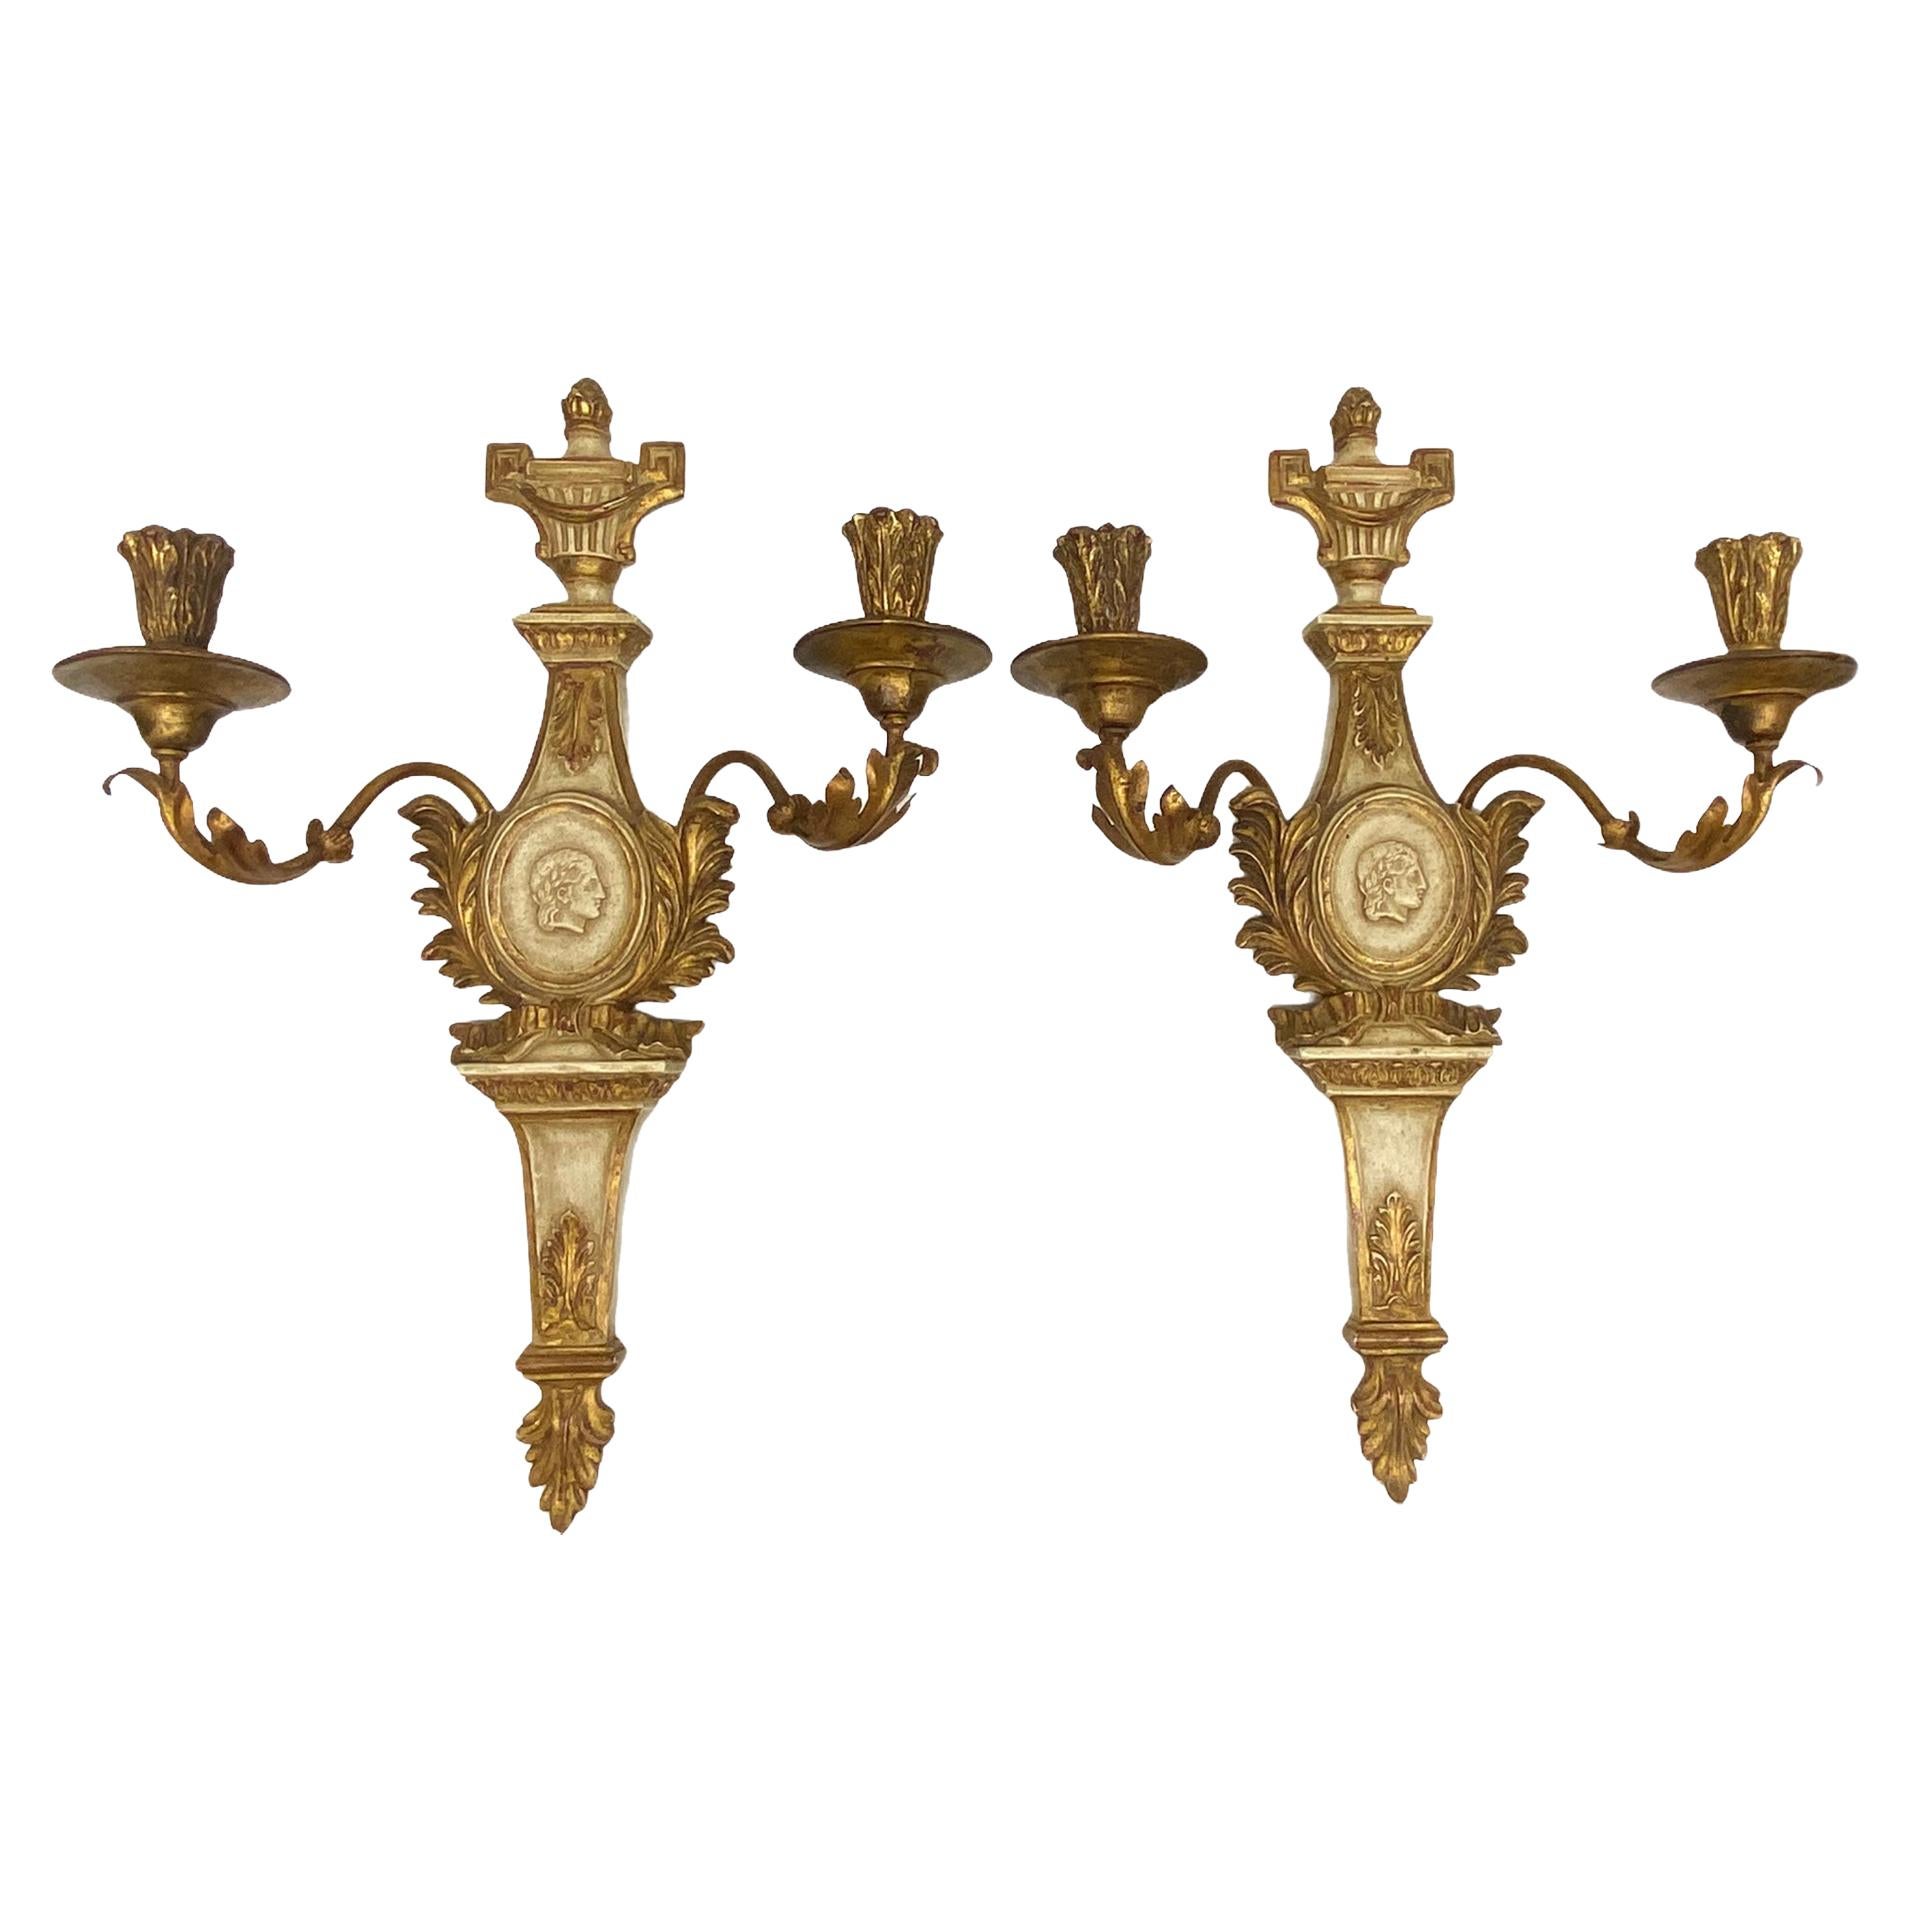 Pair of Monumental Empire Style Candle Wall Sconces Candlestick, Italy, 1970s